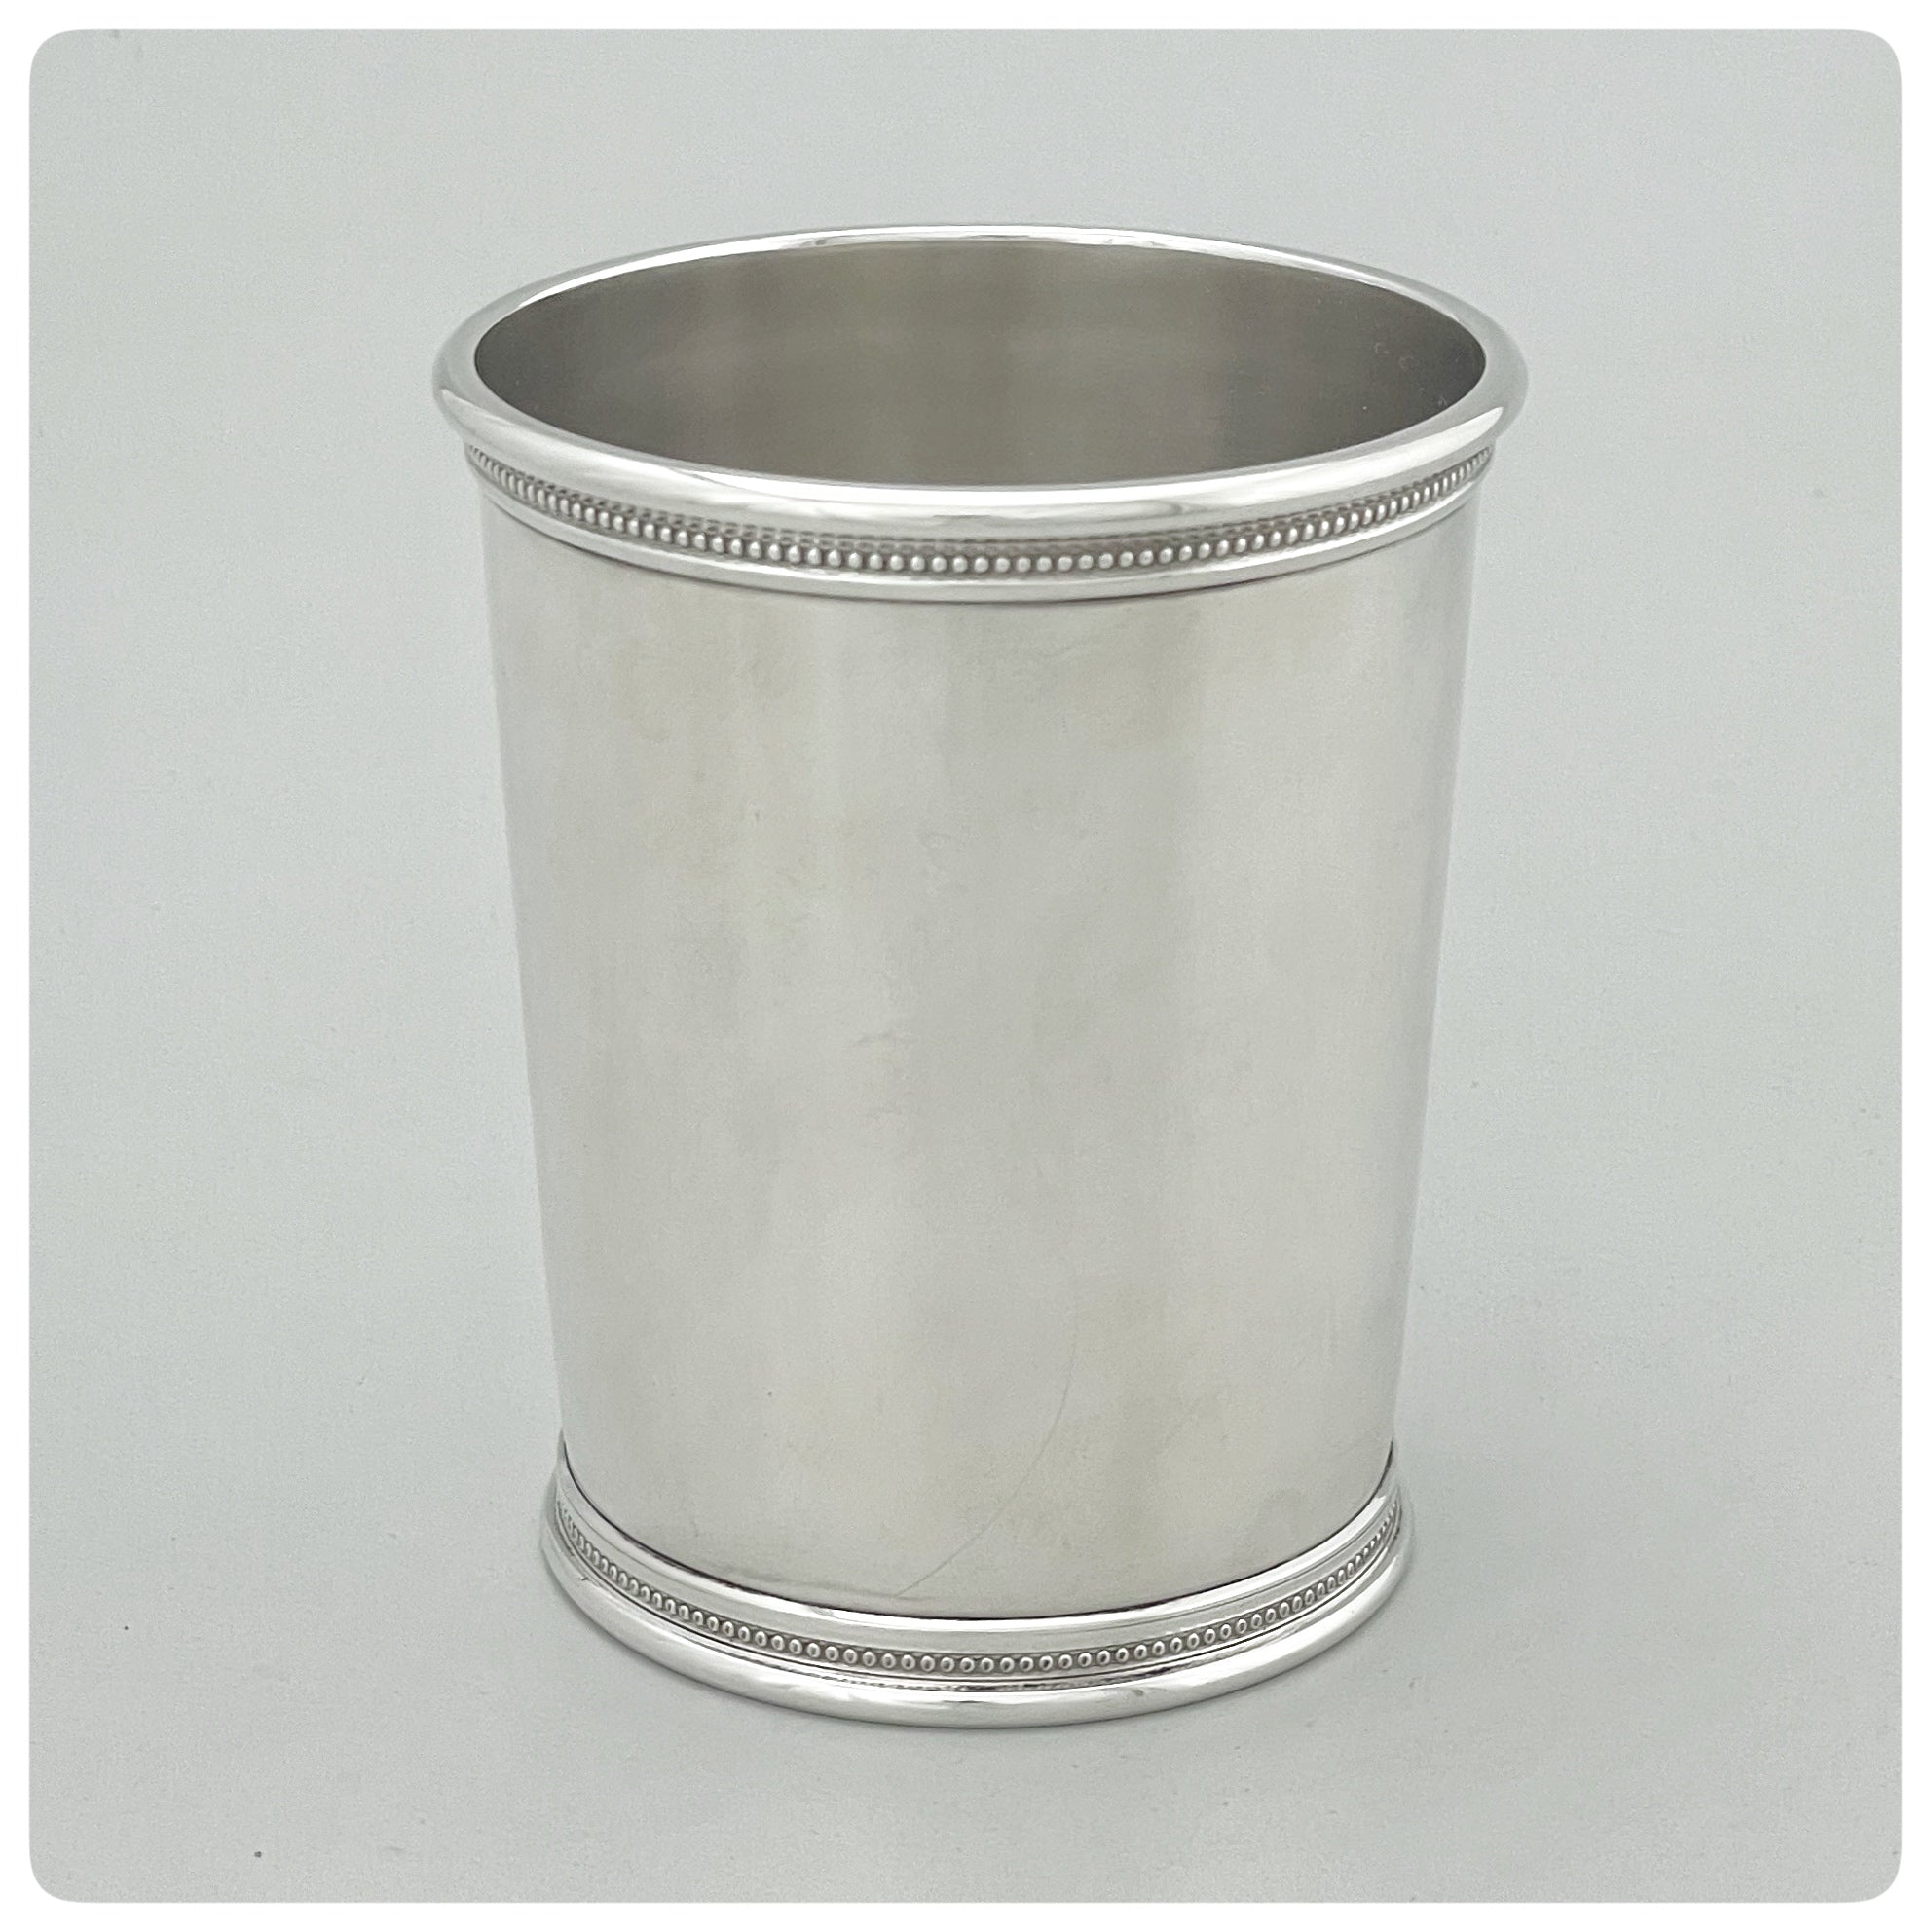 Sterling Silver Mint Julep Cup in the "Presidential Series", Mark J. Scearce, Shelbyville, KY, 1981-1985